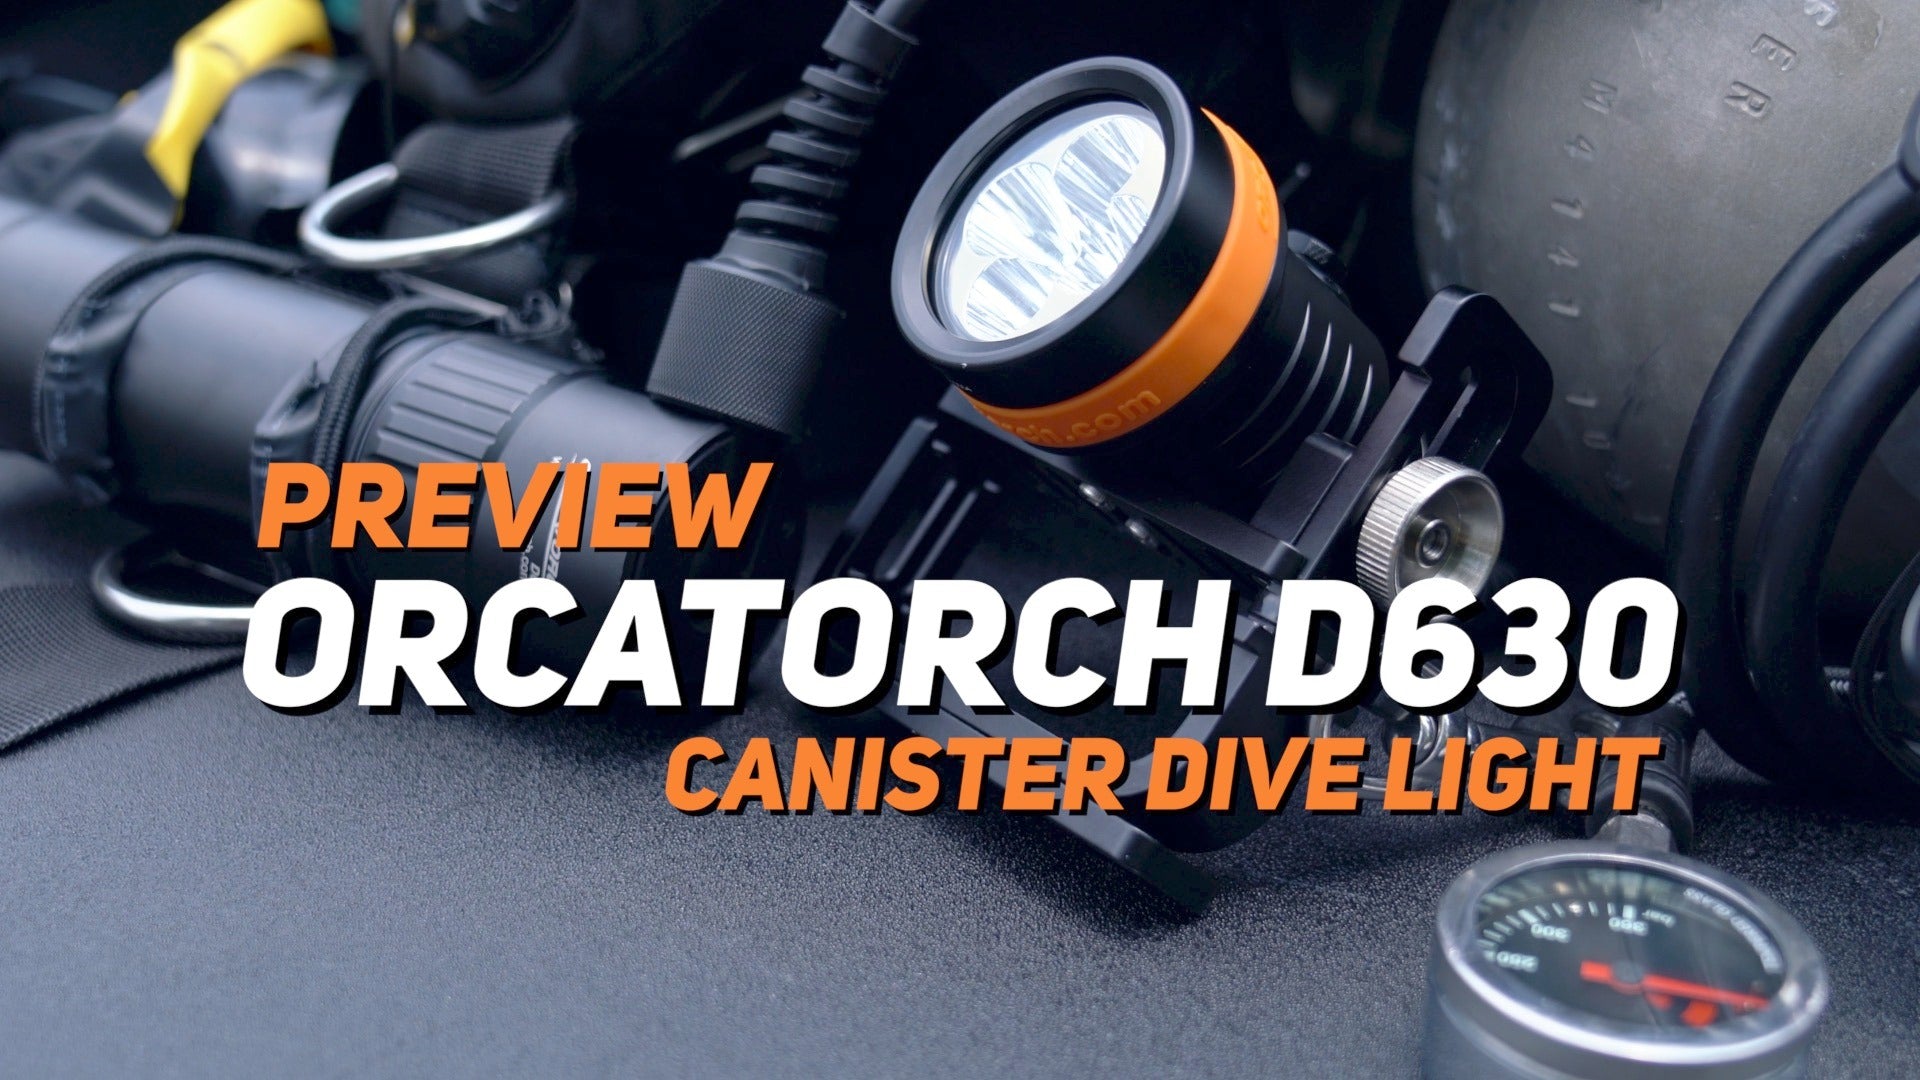 【VIDEO】OrcaTorch D630 Technical Dive Light Preview